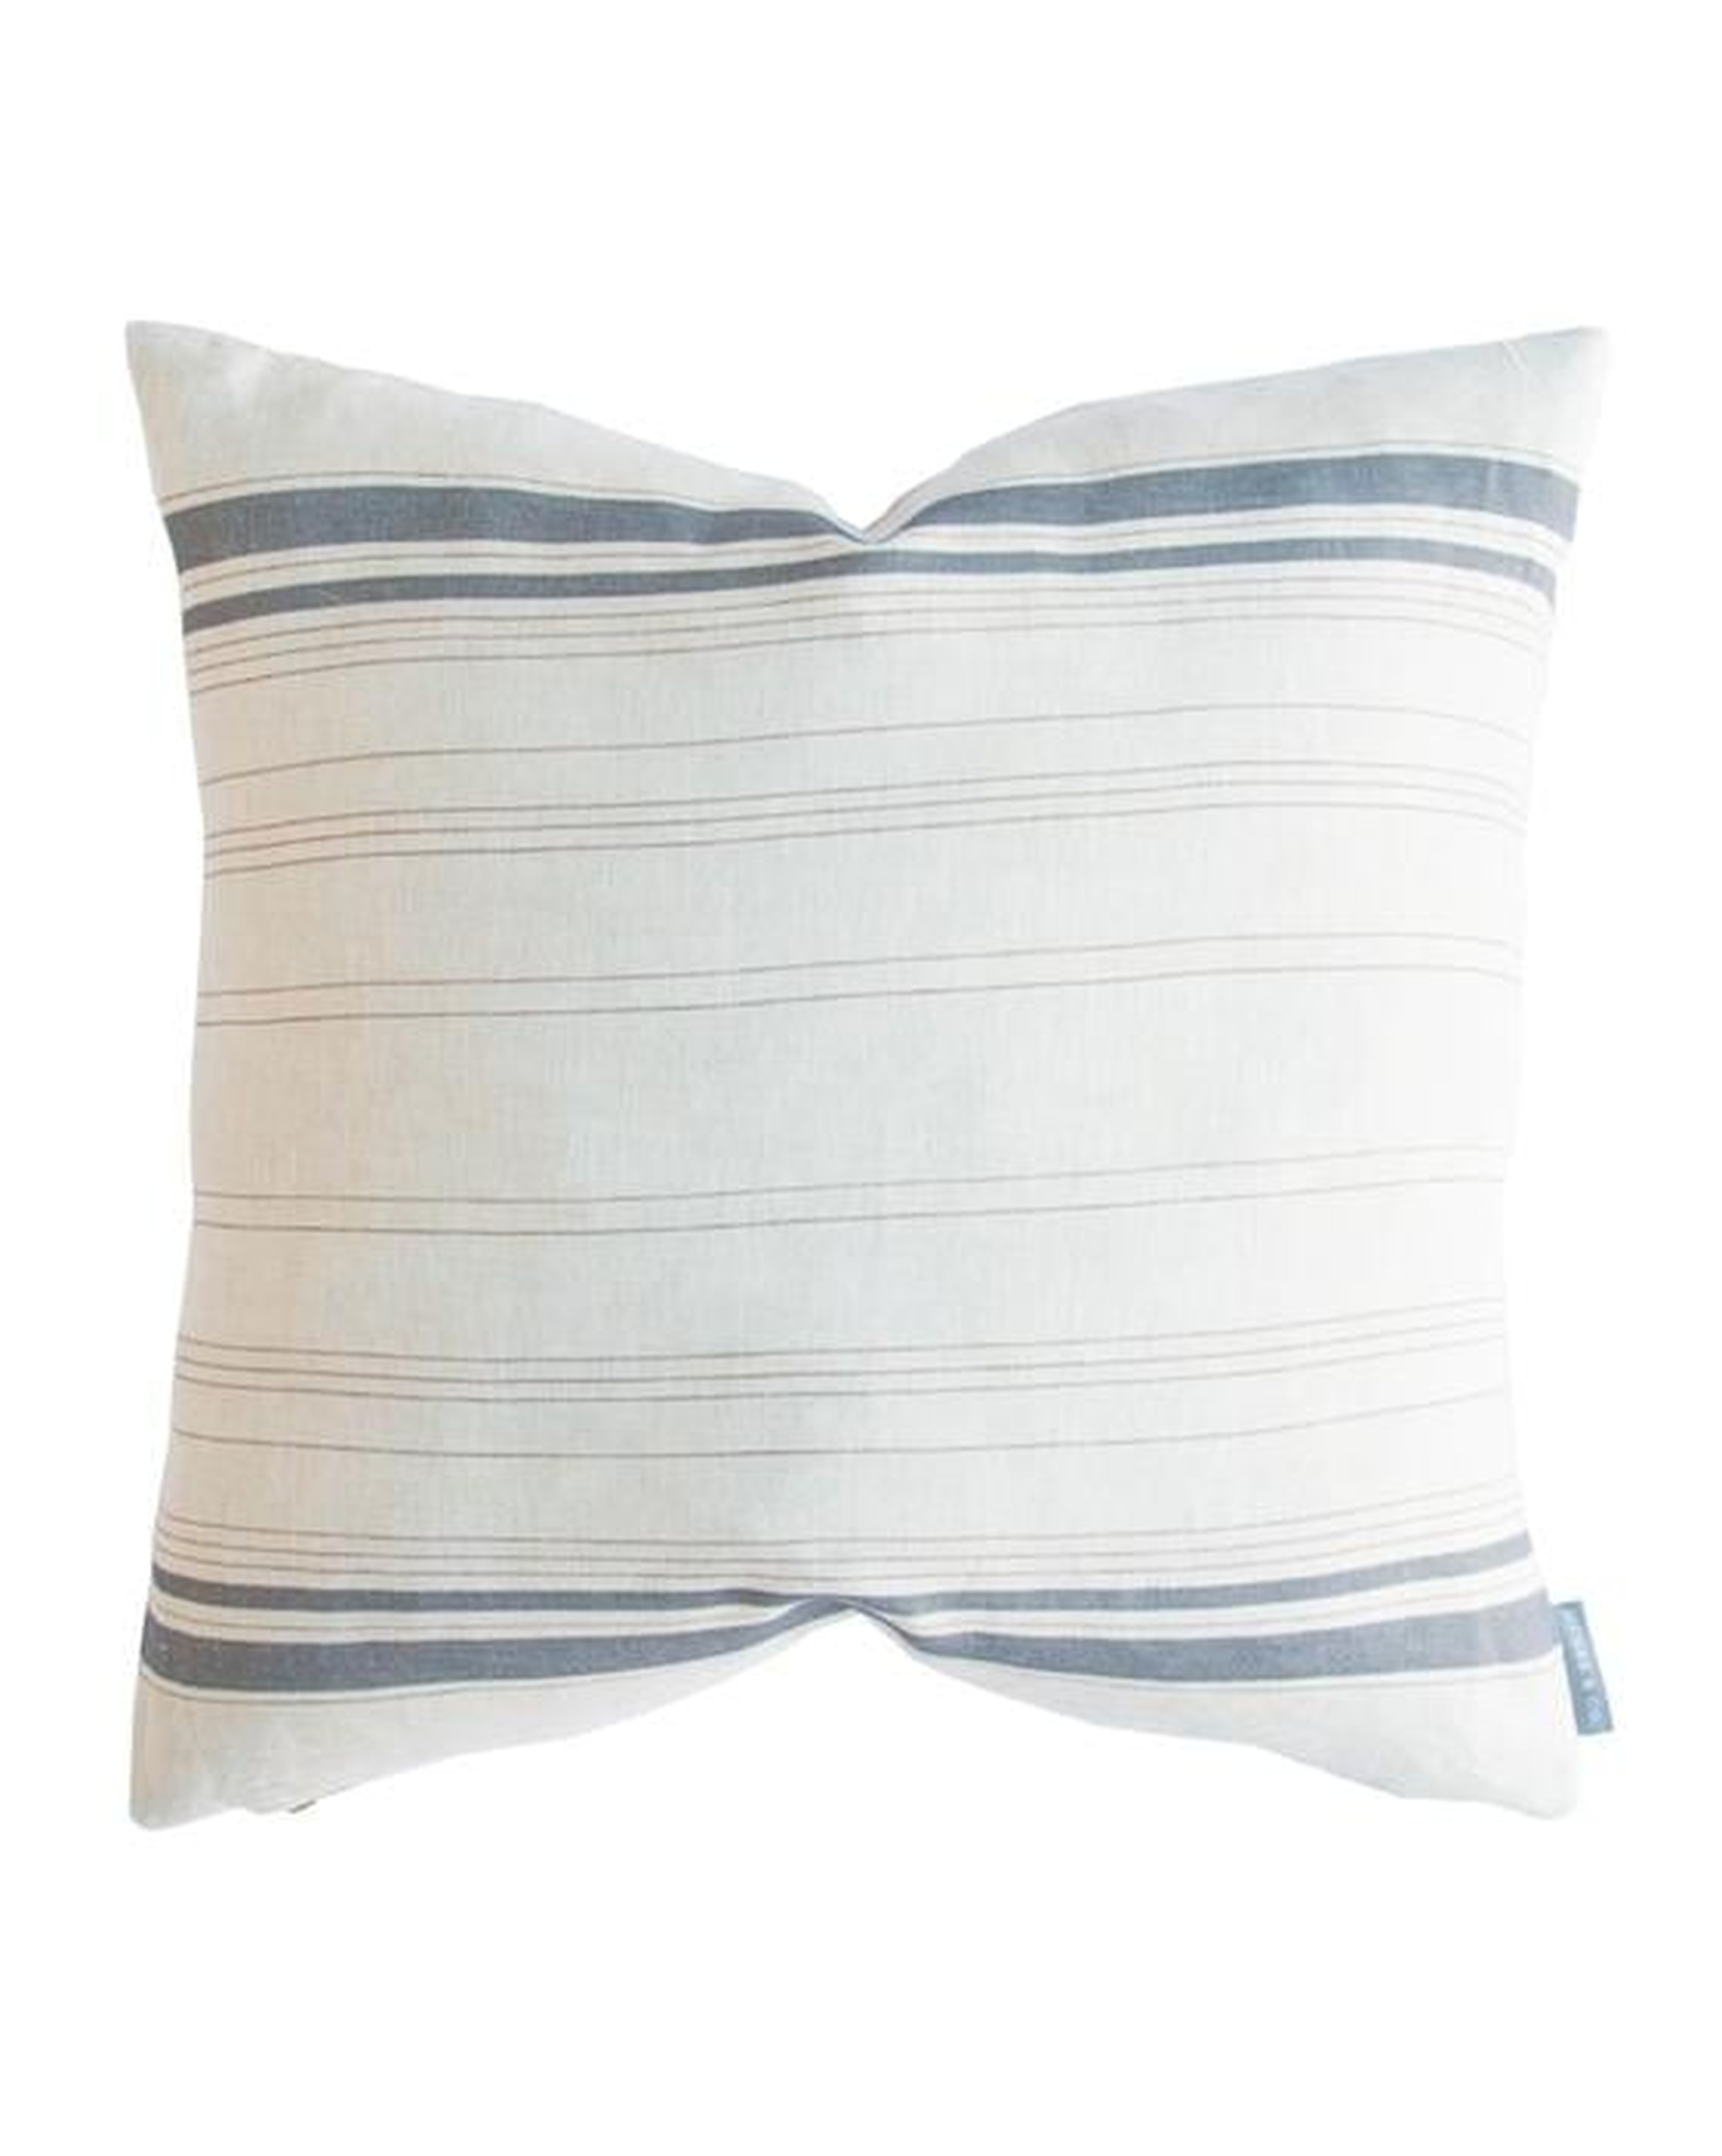 FRENCH STRIPE PILLOW WITHOUT INSERT, 22x22 - McGee & Co.